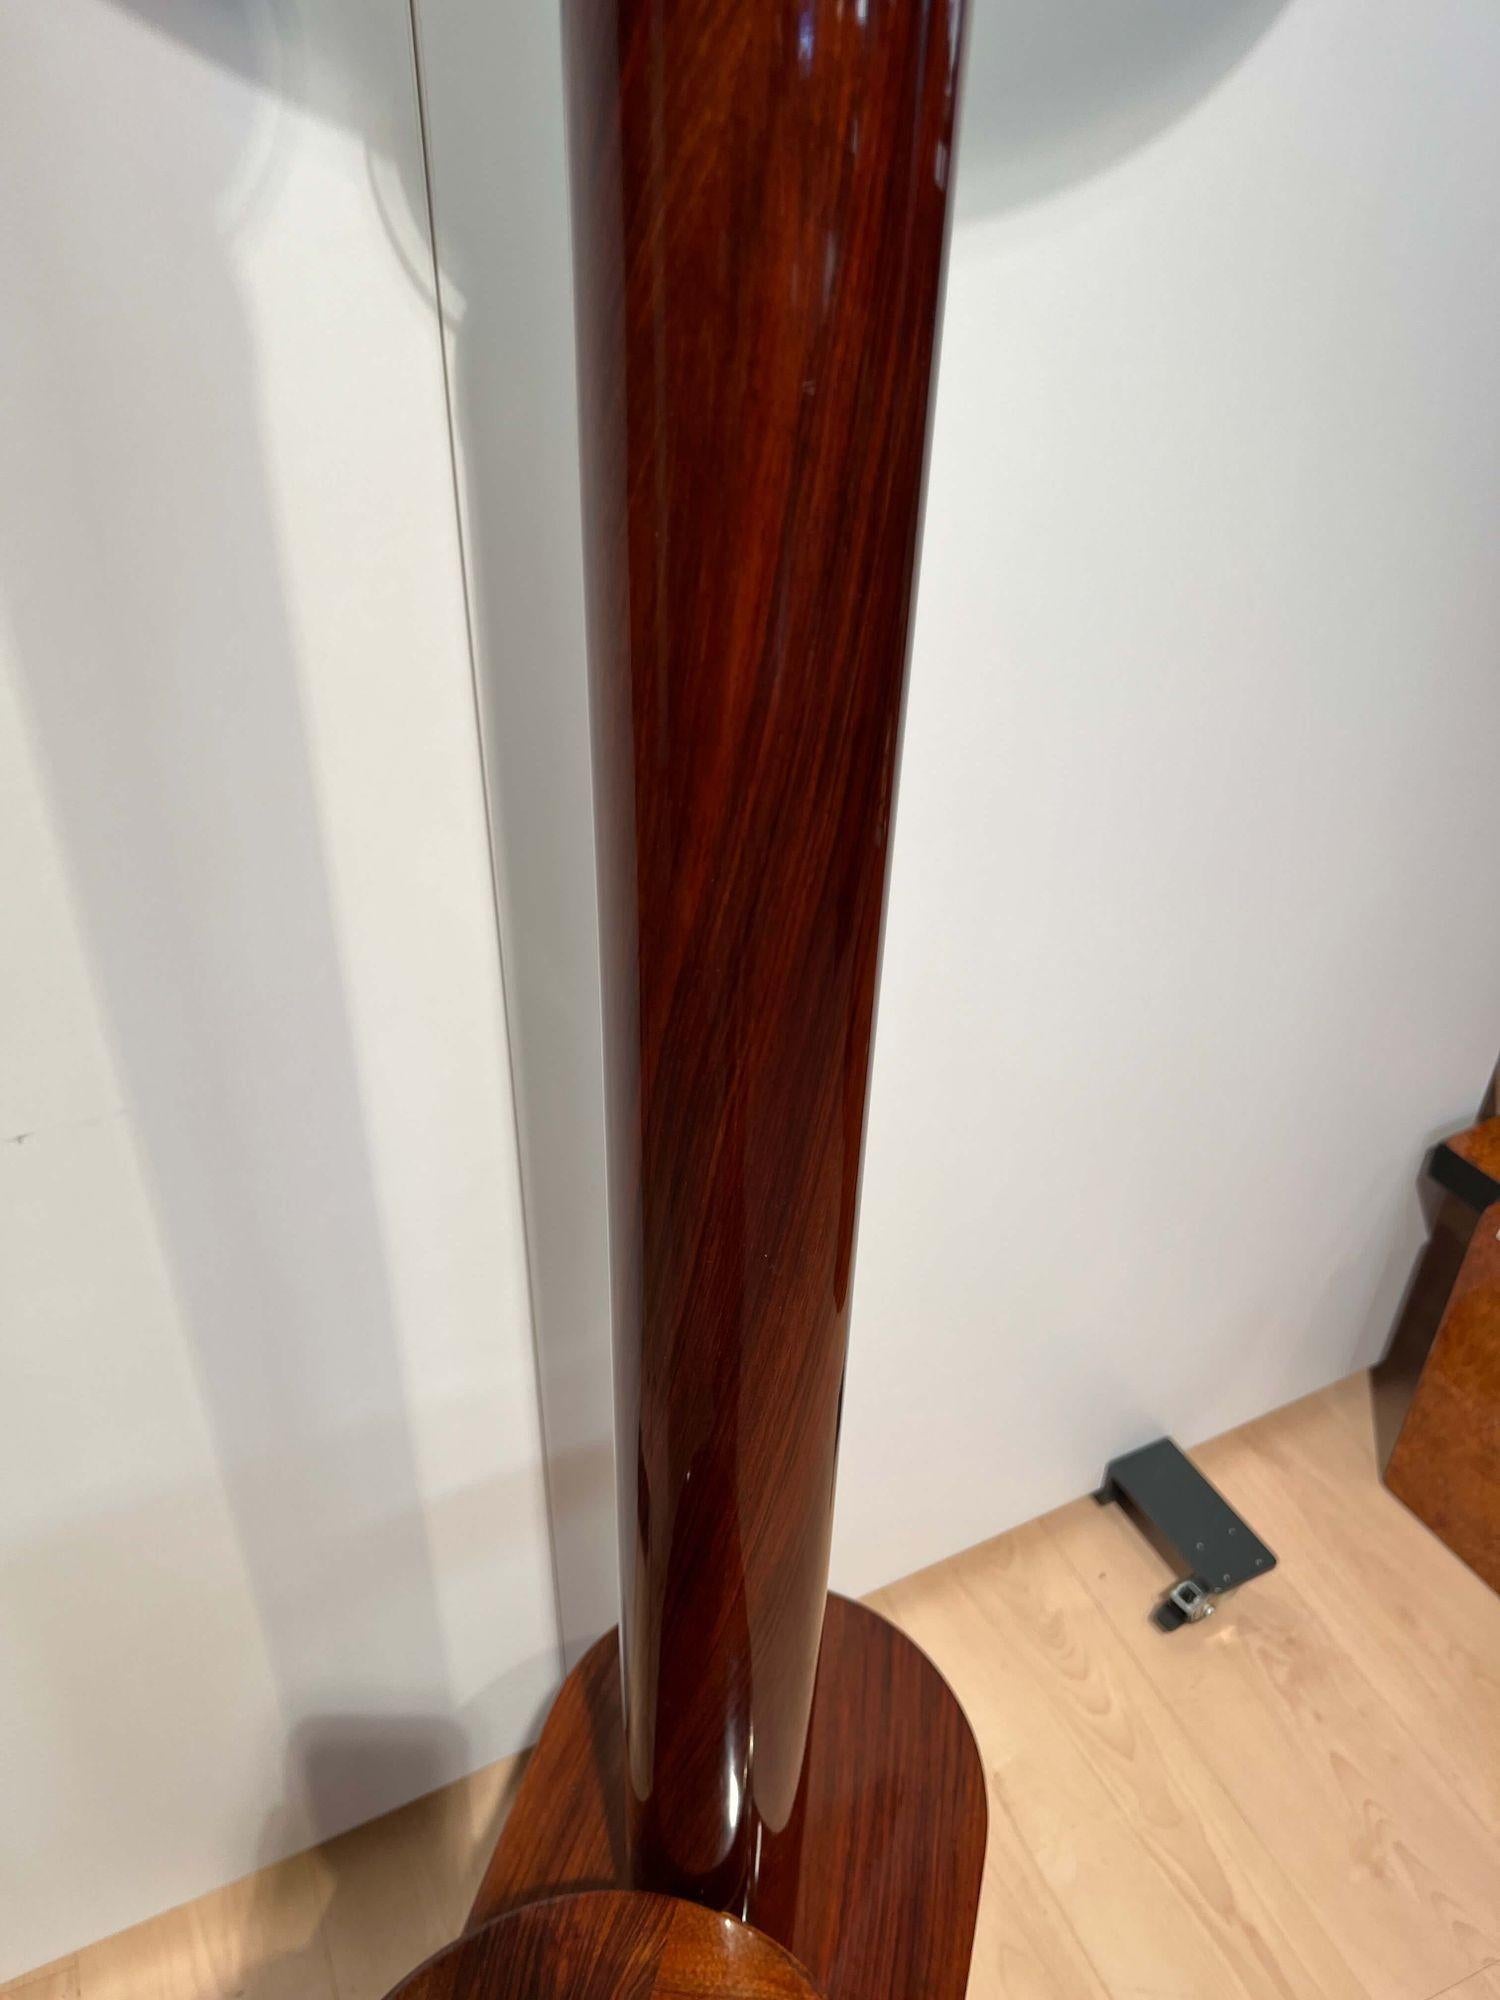 Art Deco Floor Lamp with Side Table, Walnut and Chrome, France, circa 1930 For Sale 7